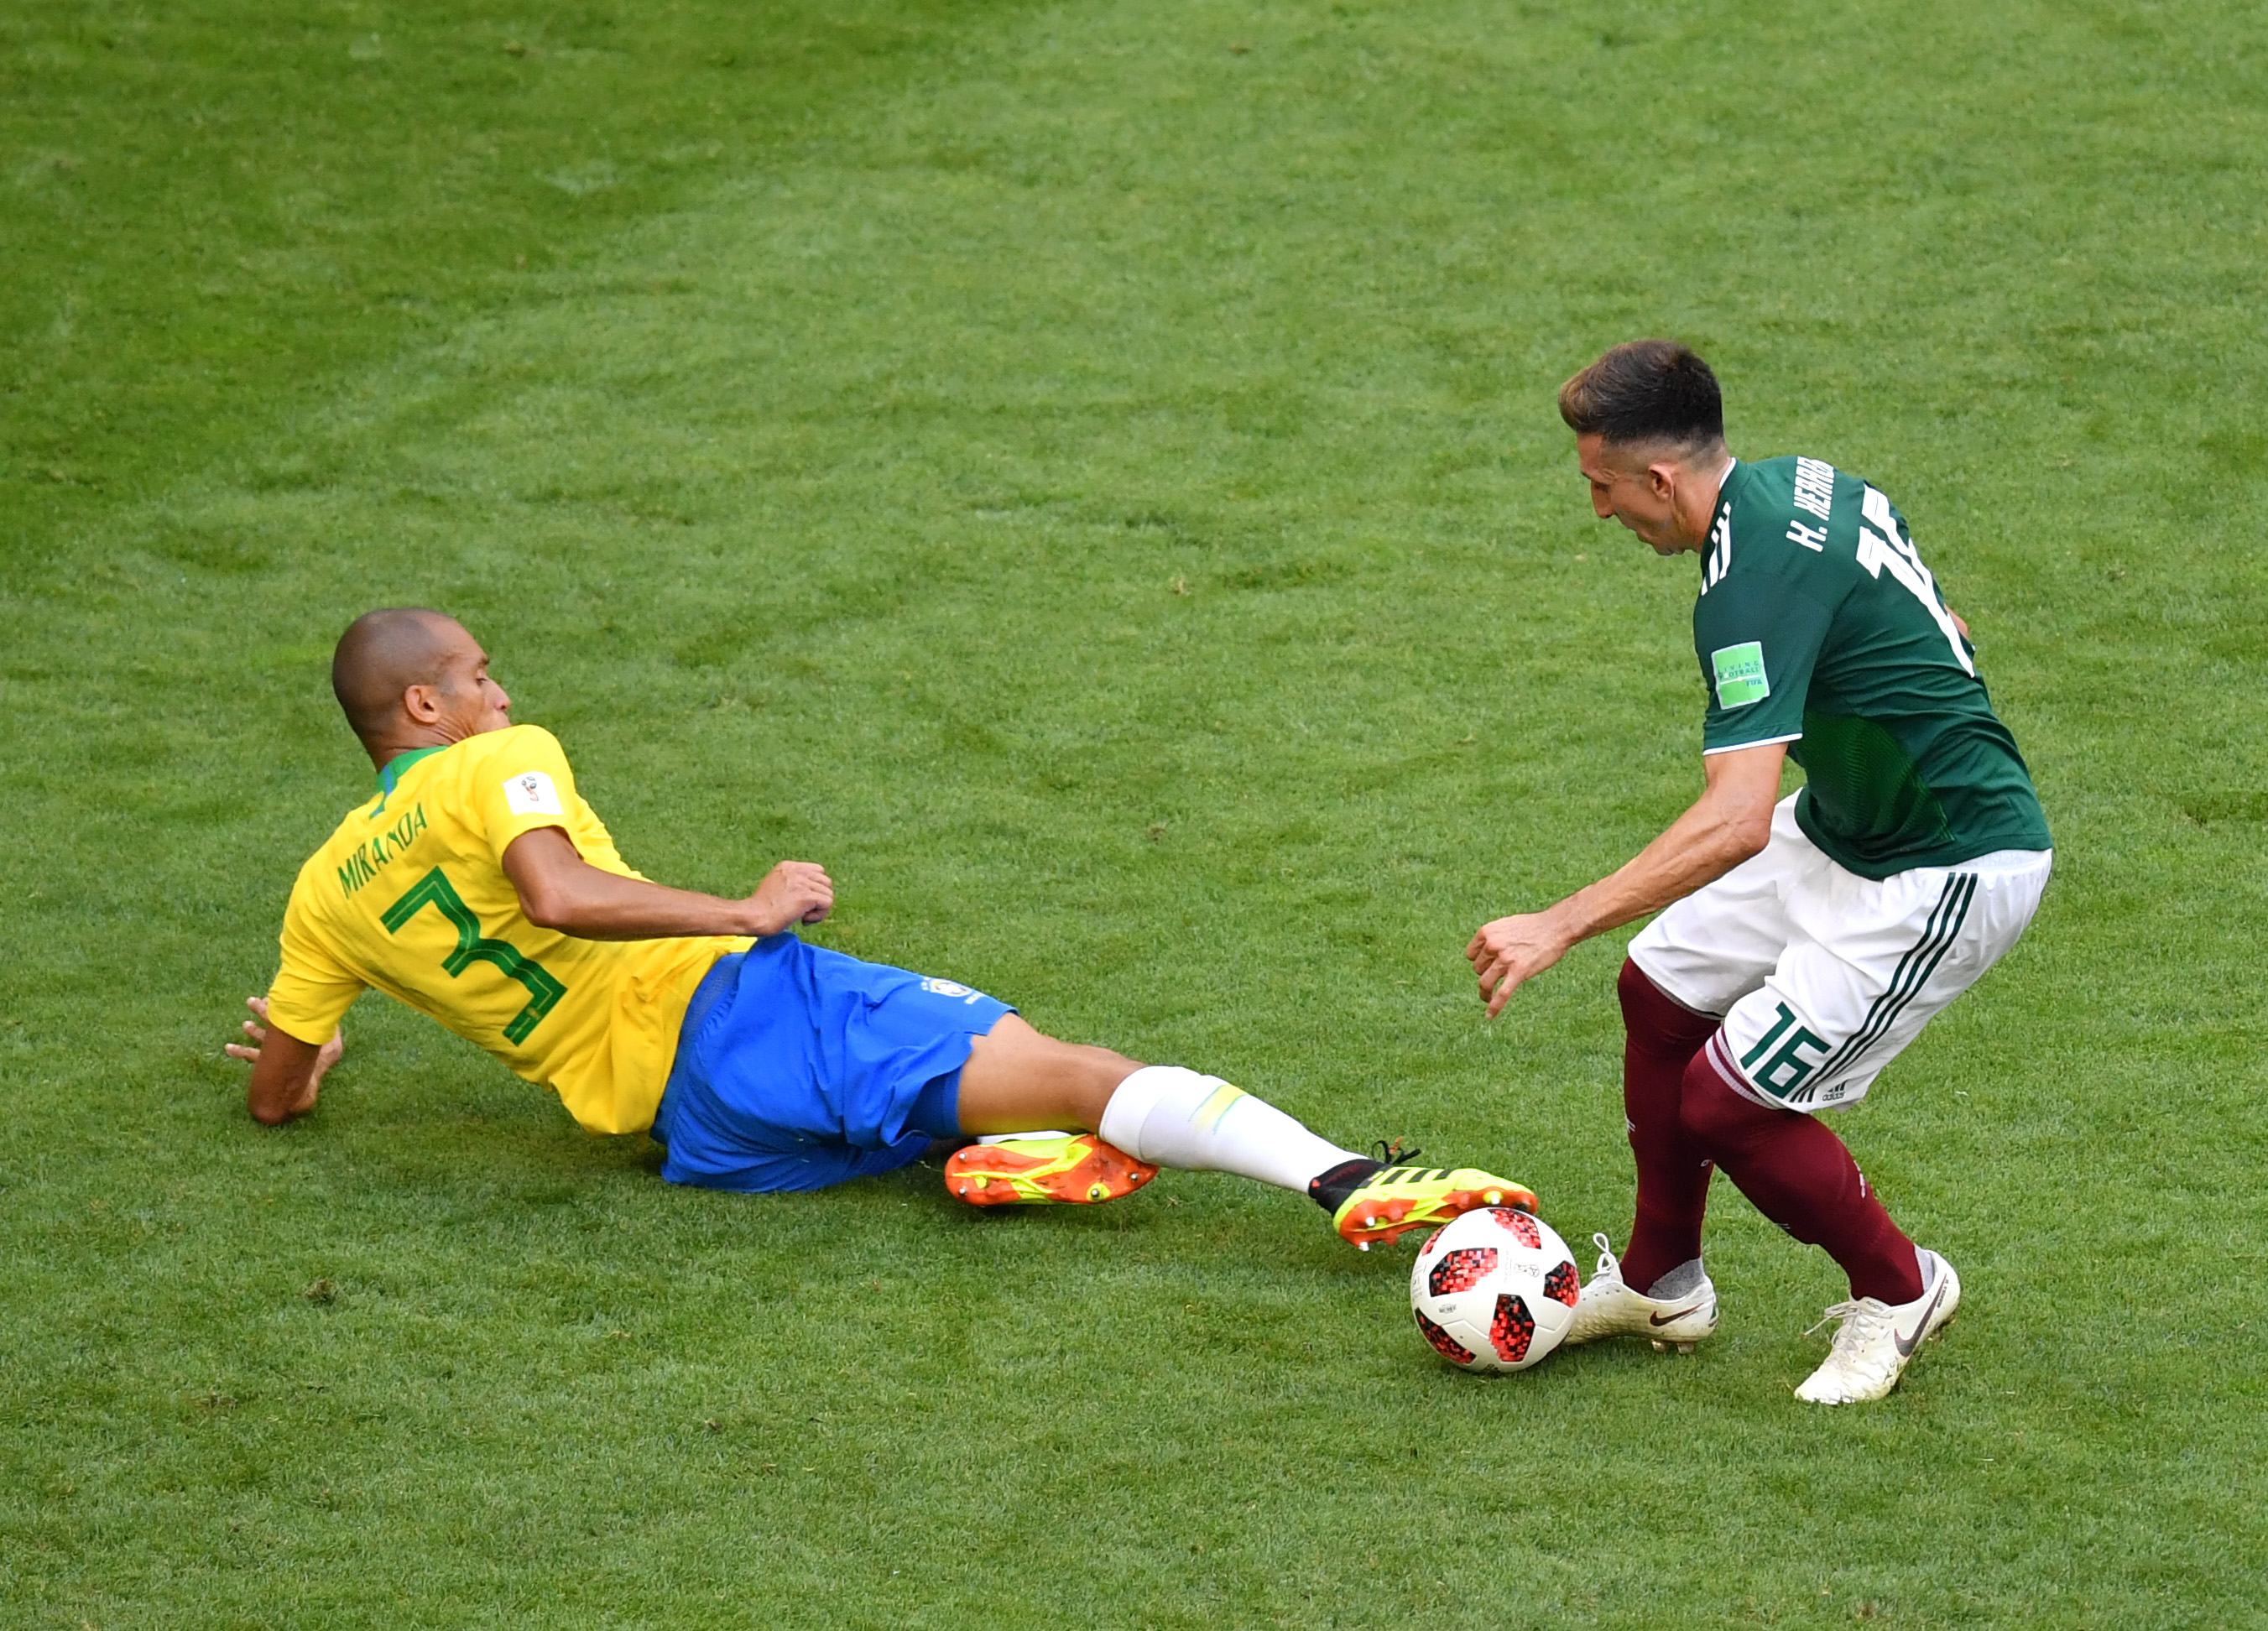 SAMARA, RUSSIA - JULY 02:  Miranda of Brazil tackles Hector Herrera of Mexico  during the 2018 FIFA World Cup Russia Round of 16 match between Brazil and Mexico at Samara Arena on July 2, 2018 in Samara, Russia.  (Photo by Hector Vivas/Getty Images)